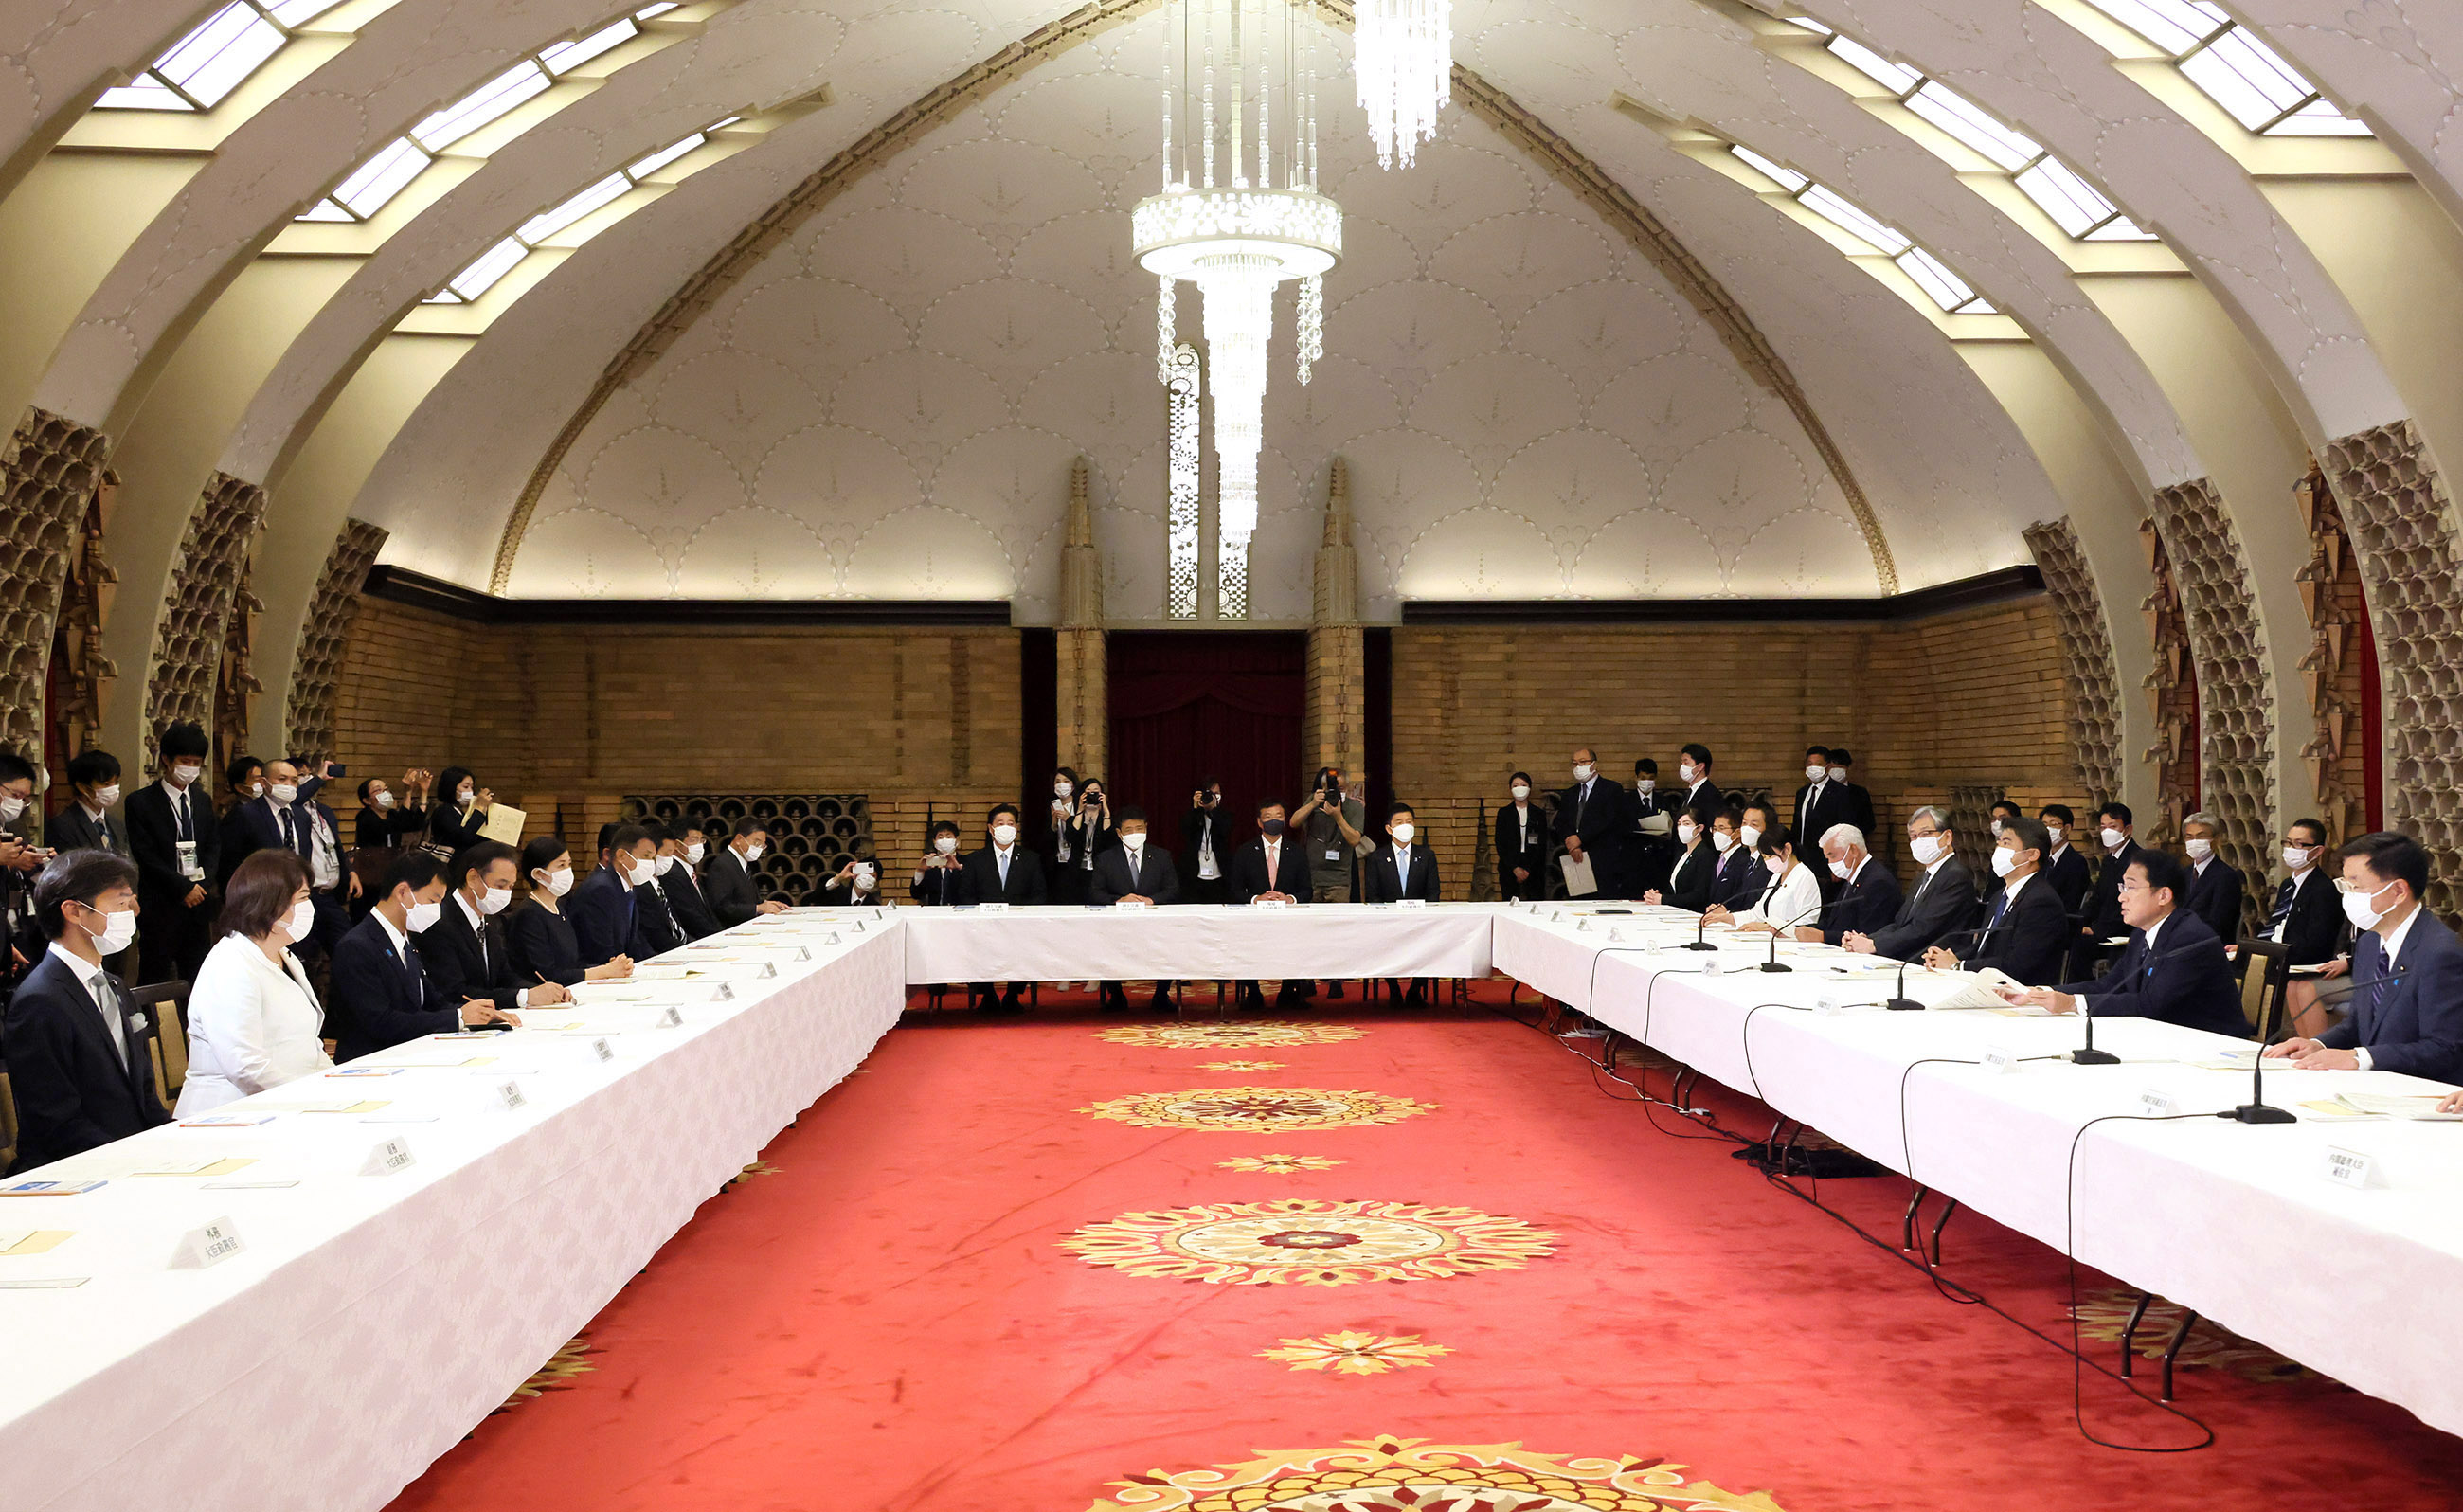 Photograph of the Prime Minister delivering an address (7)